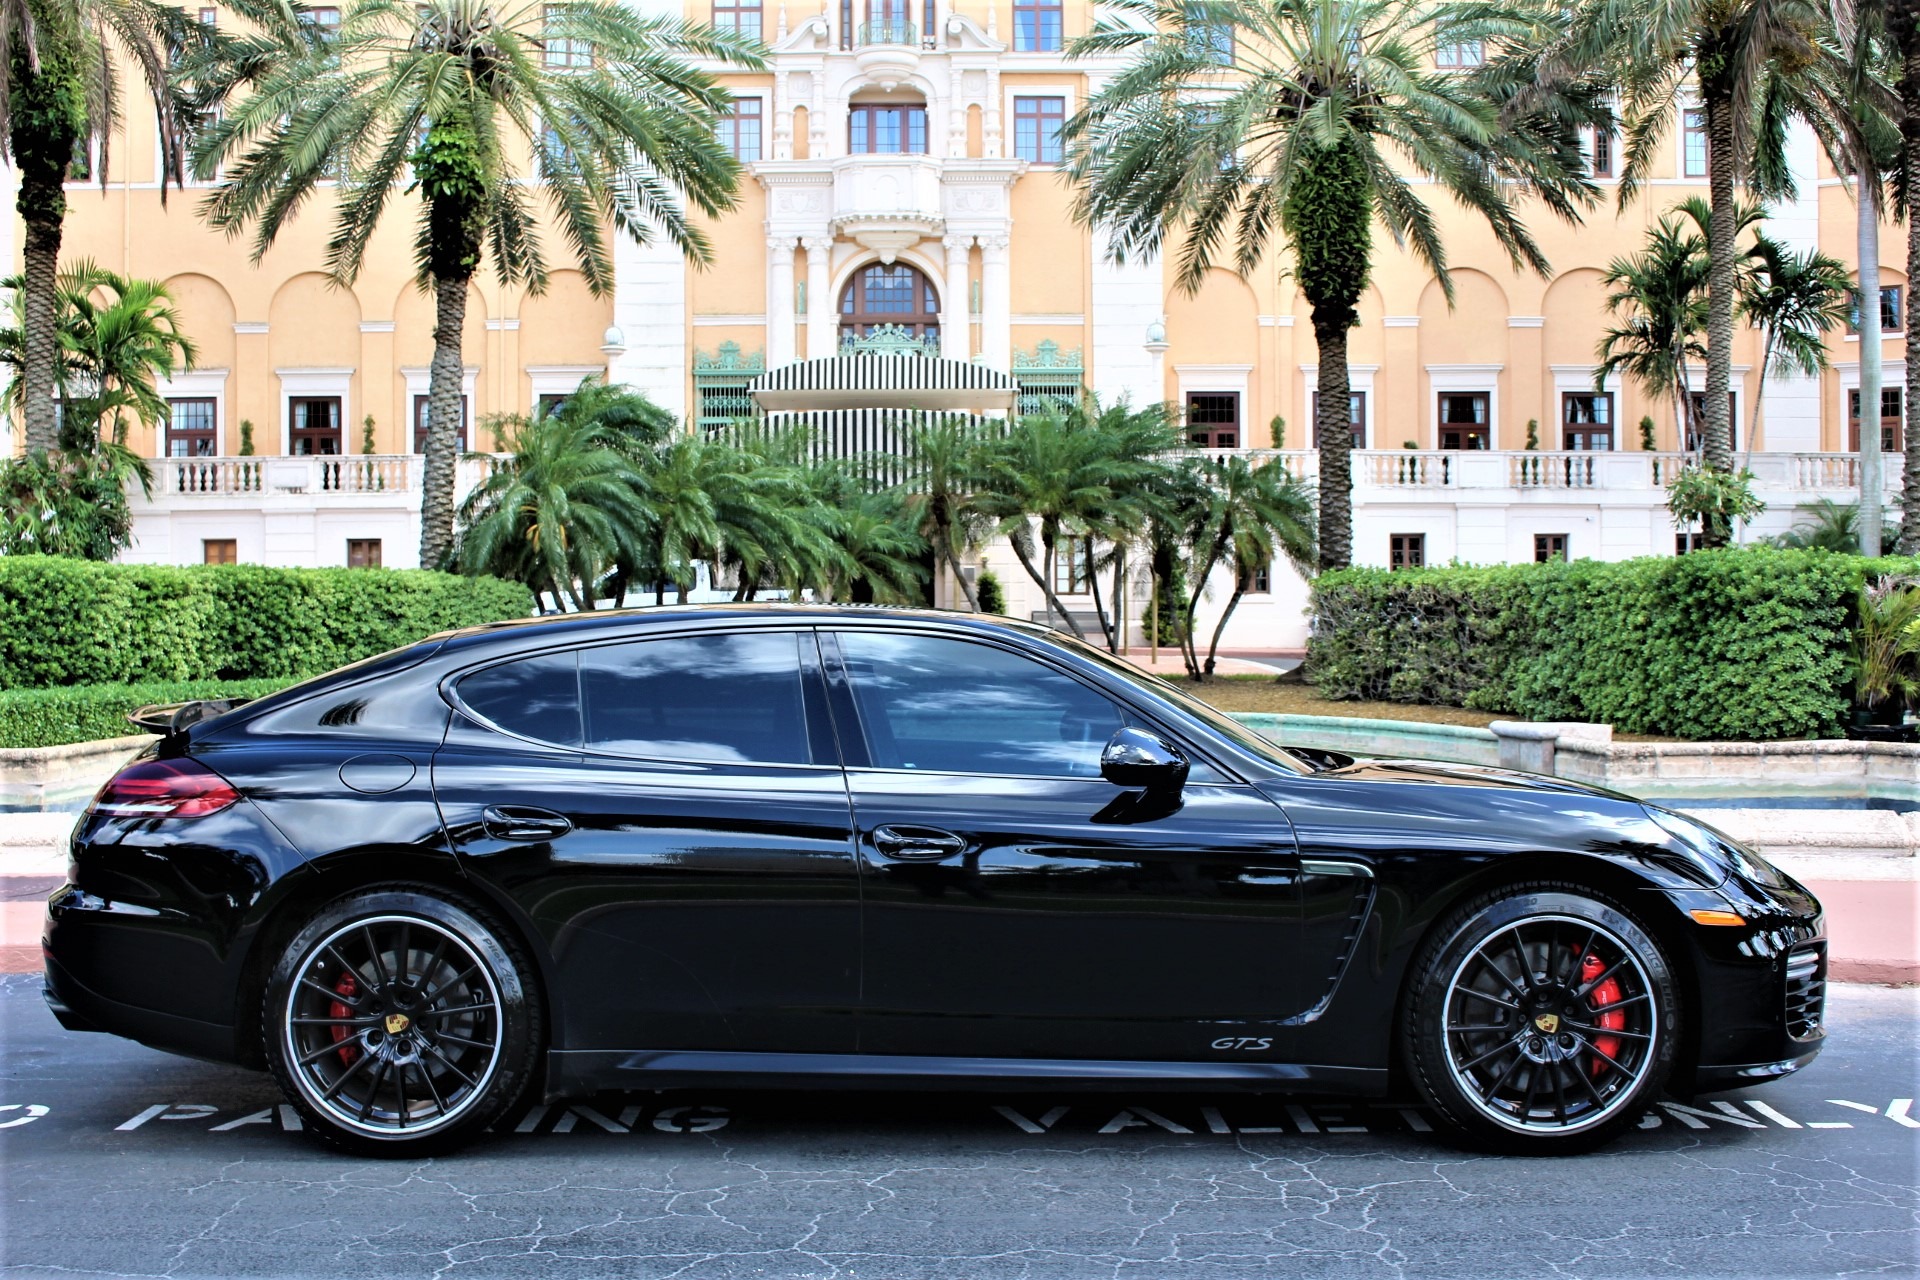 Used 2015 Porsche Panamera GTS for sale Sold at The Gables Sports Cars in Miami FL 33146 3